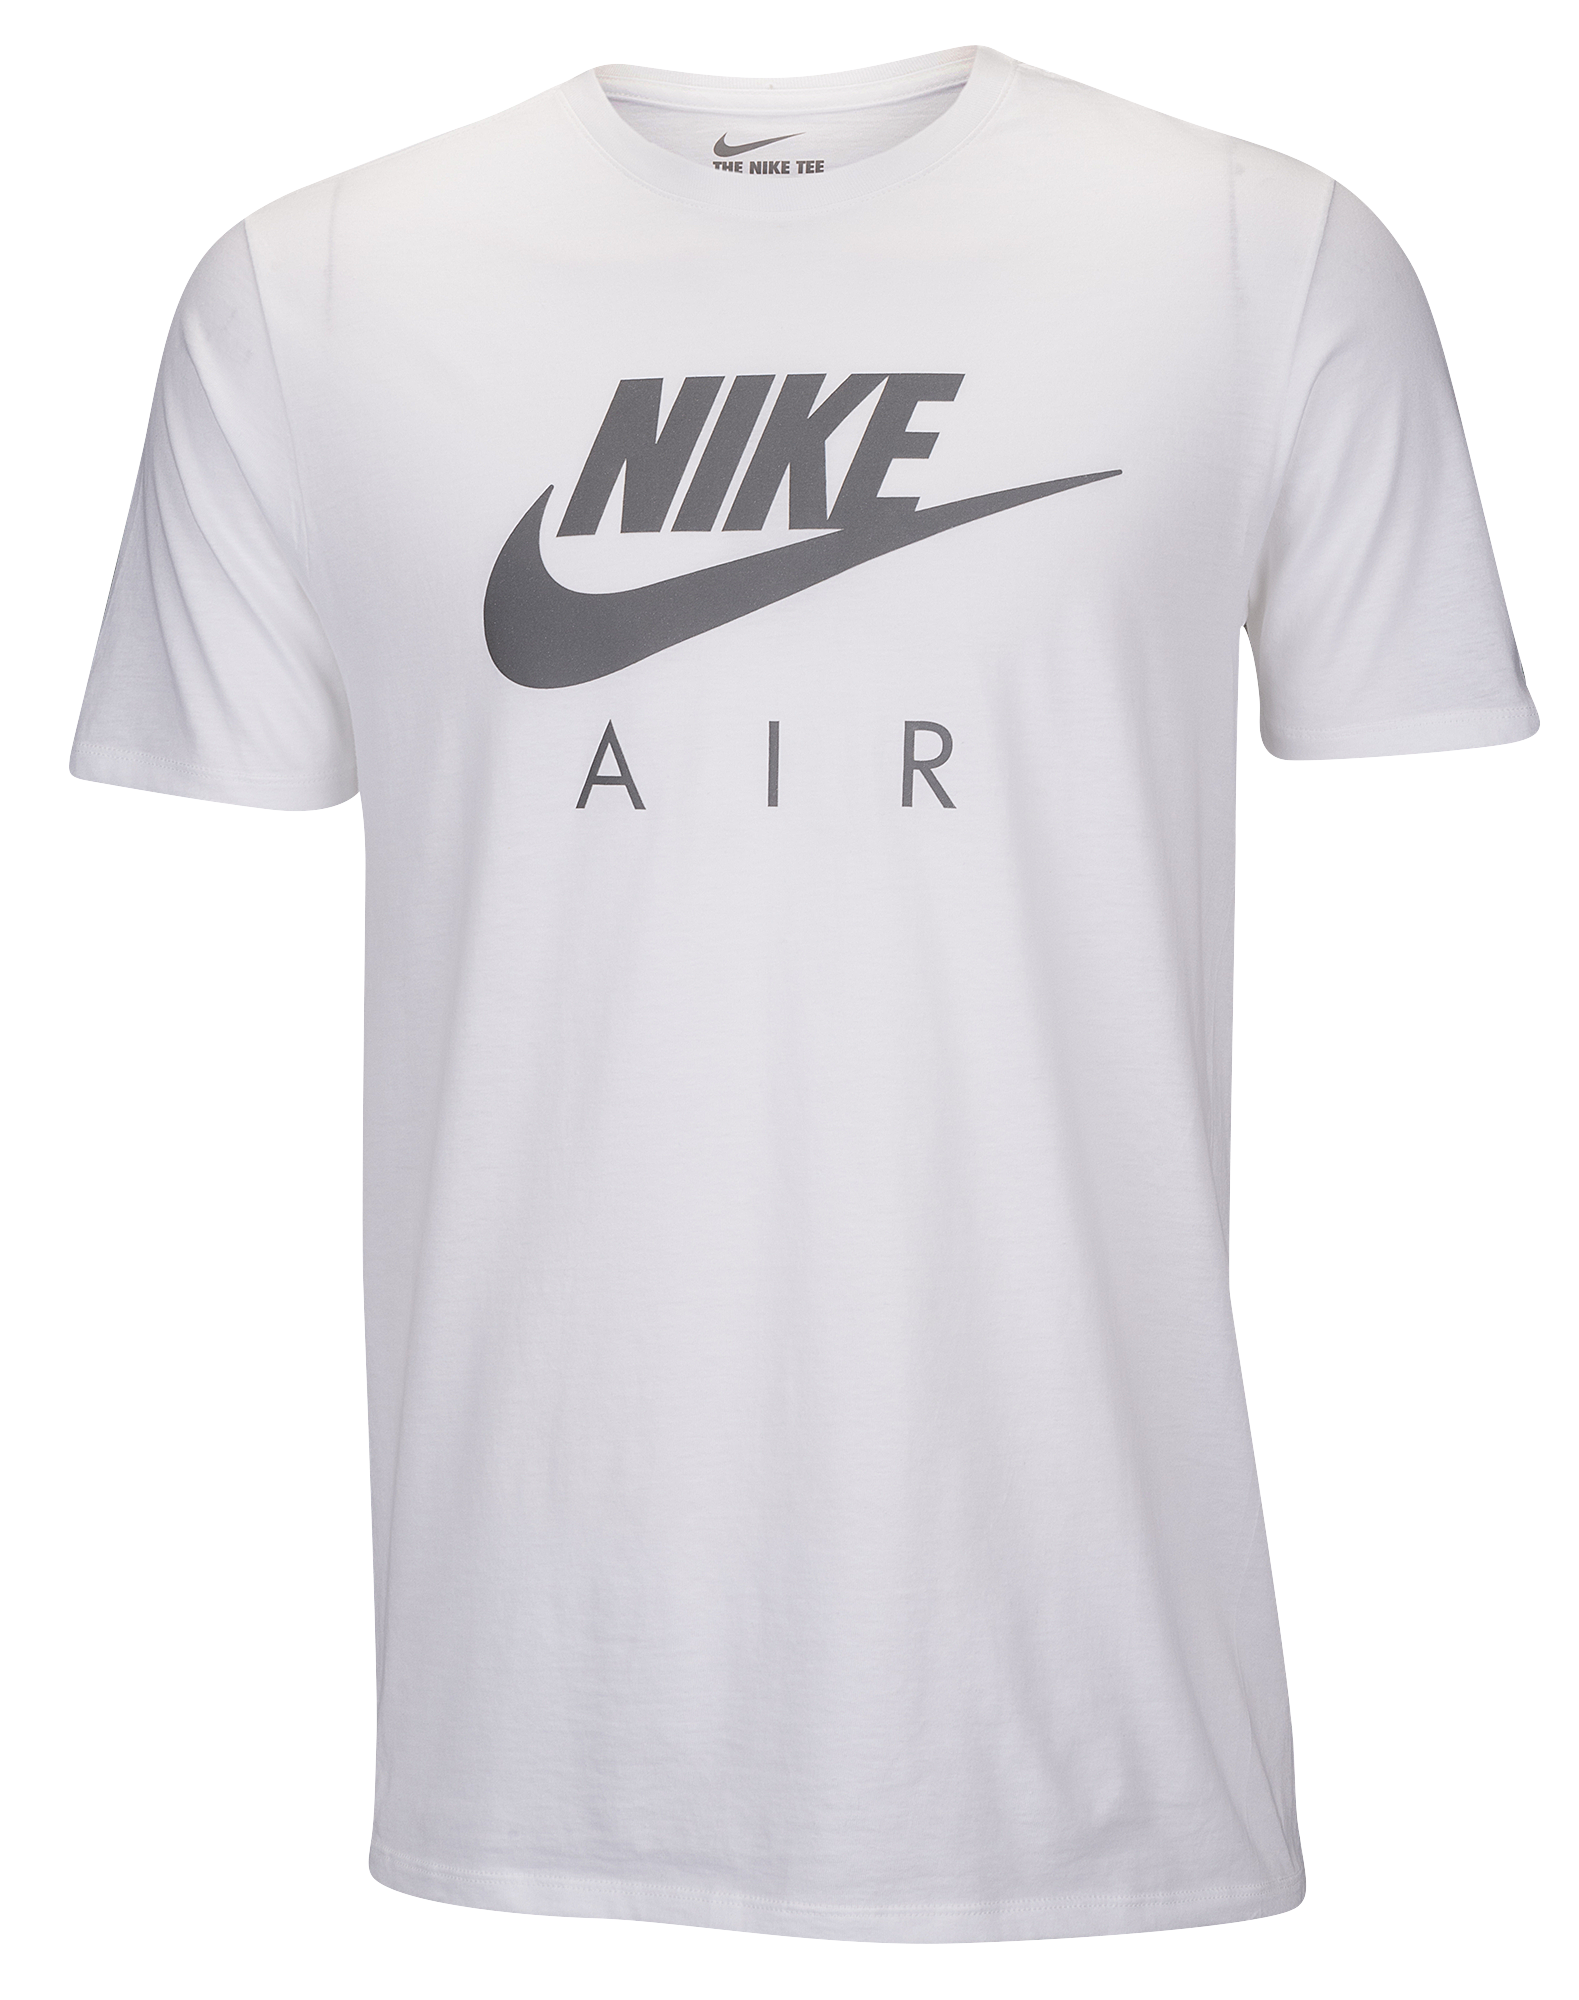 white and red nike t shirt